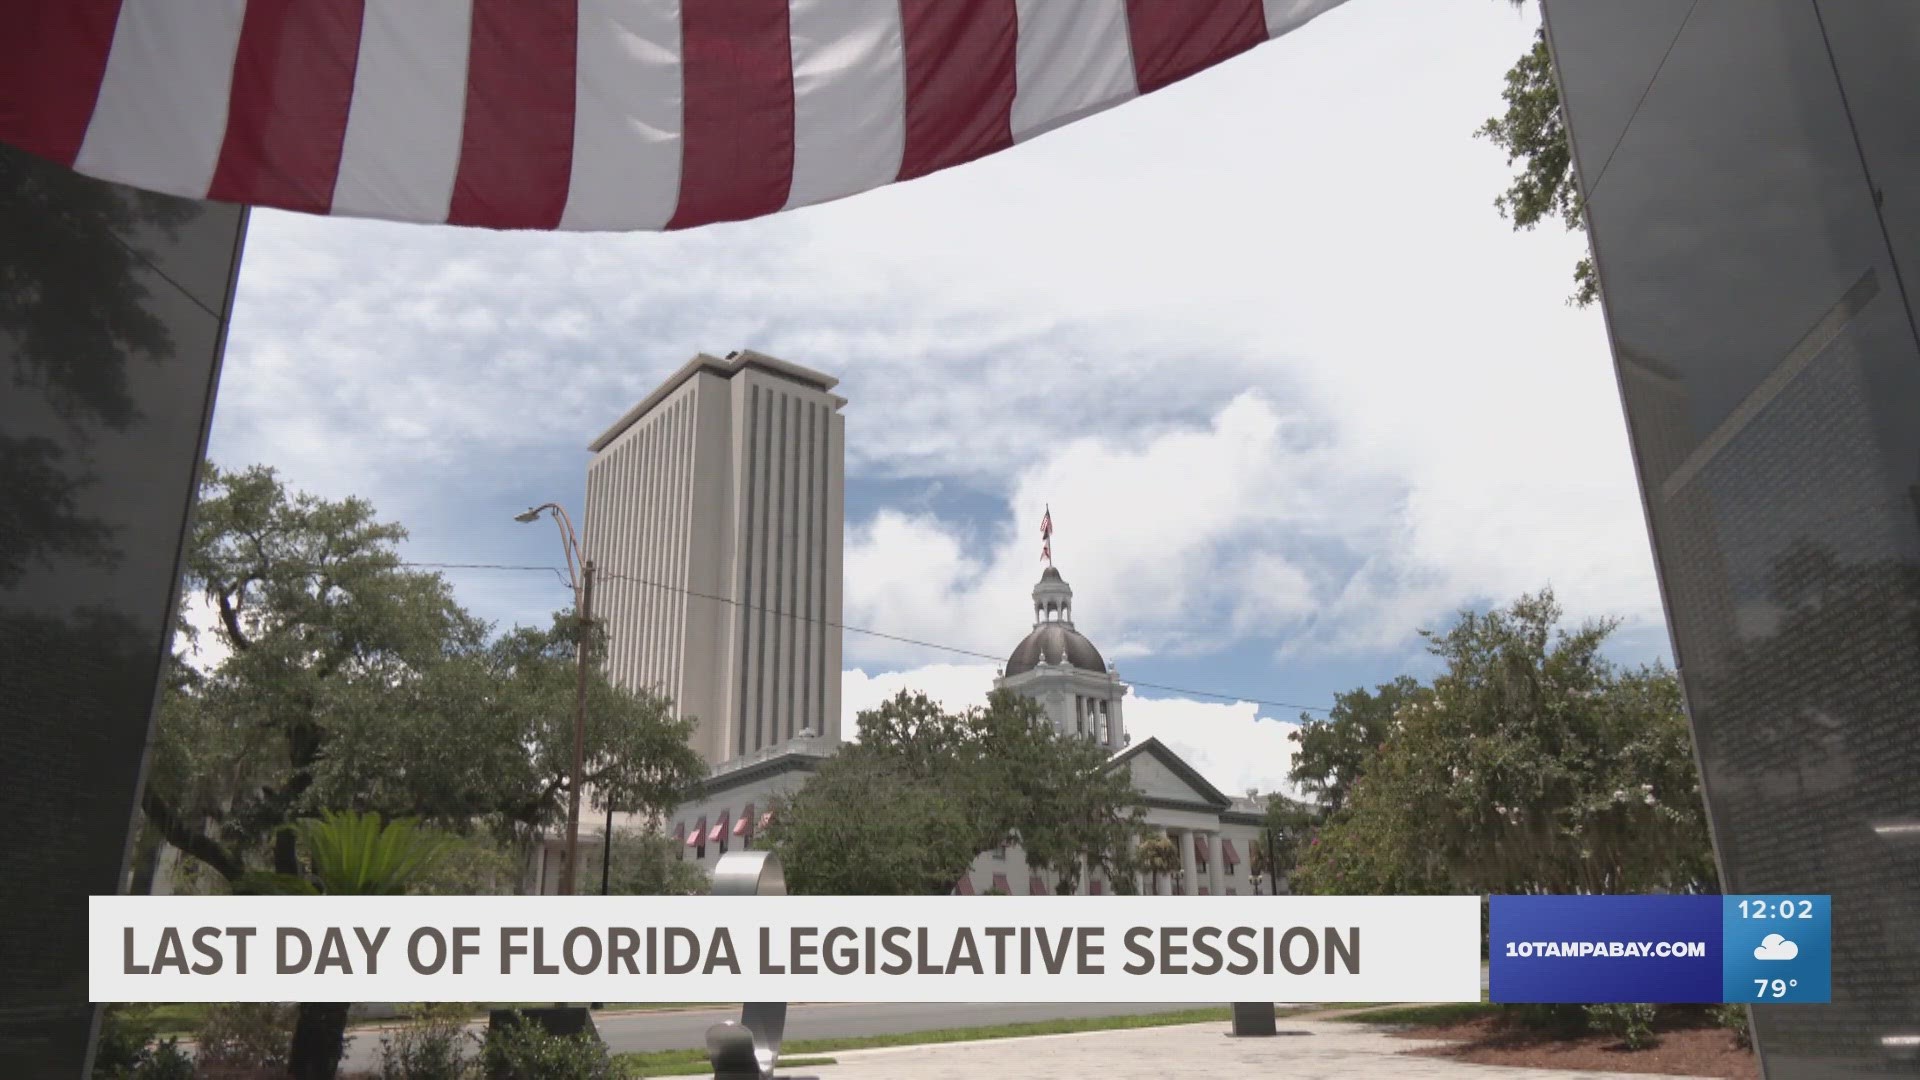 Friday is the last day for Florida lawmakers to pass bills to Gov. Ron DeSantis.